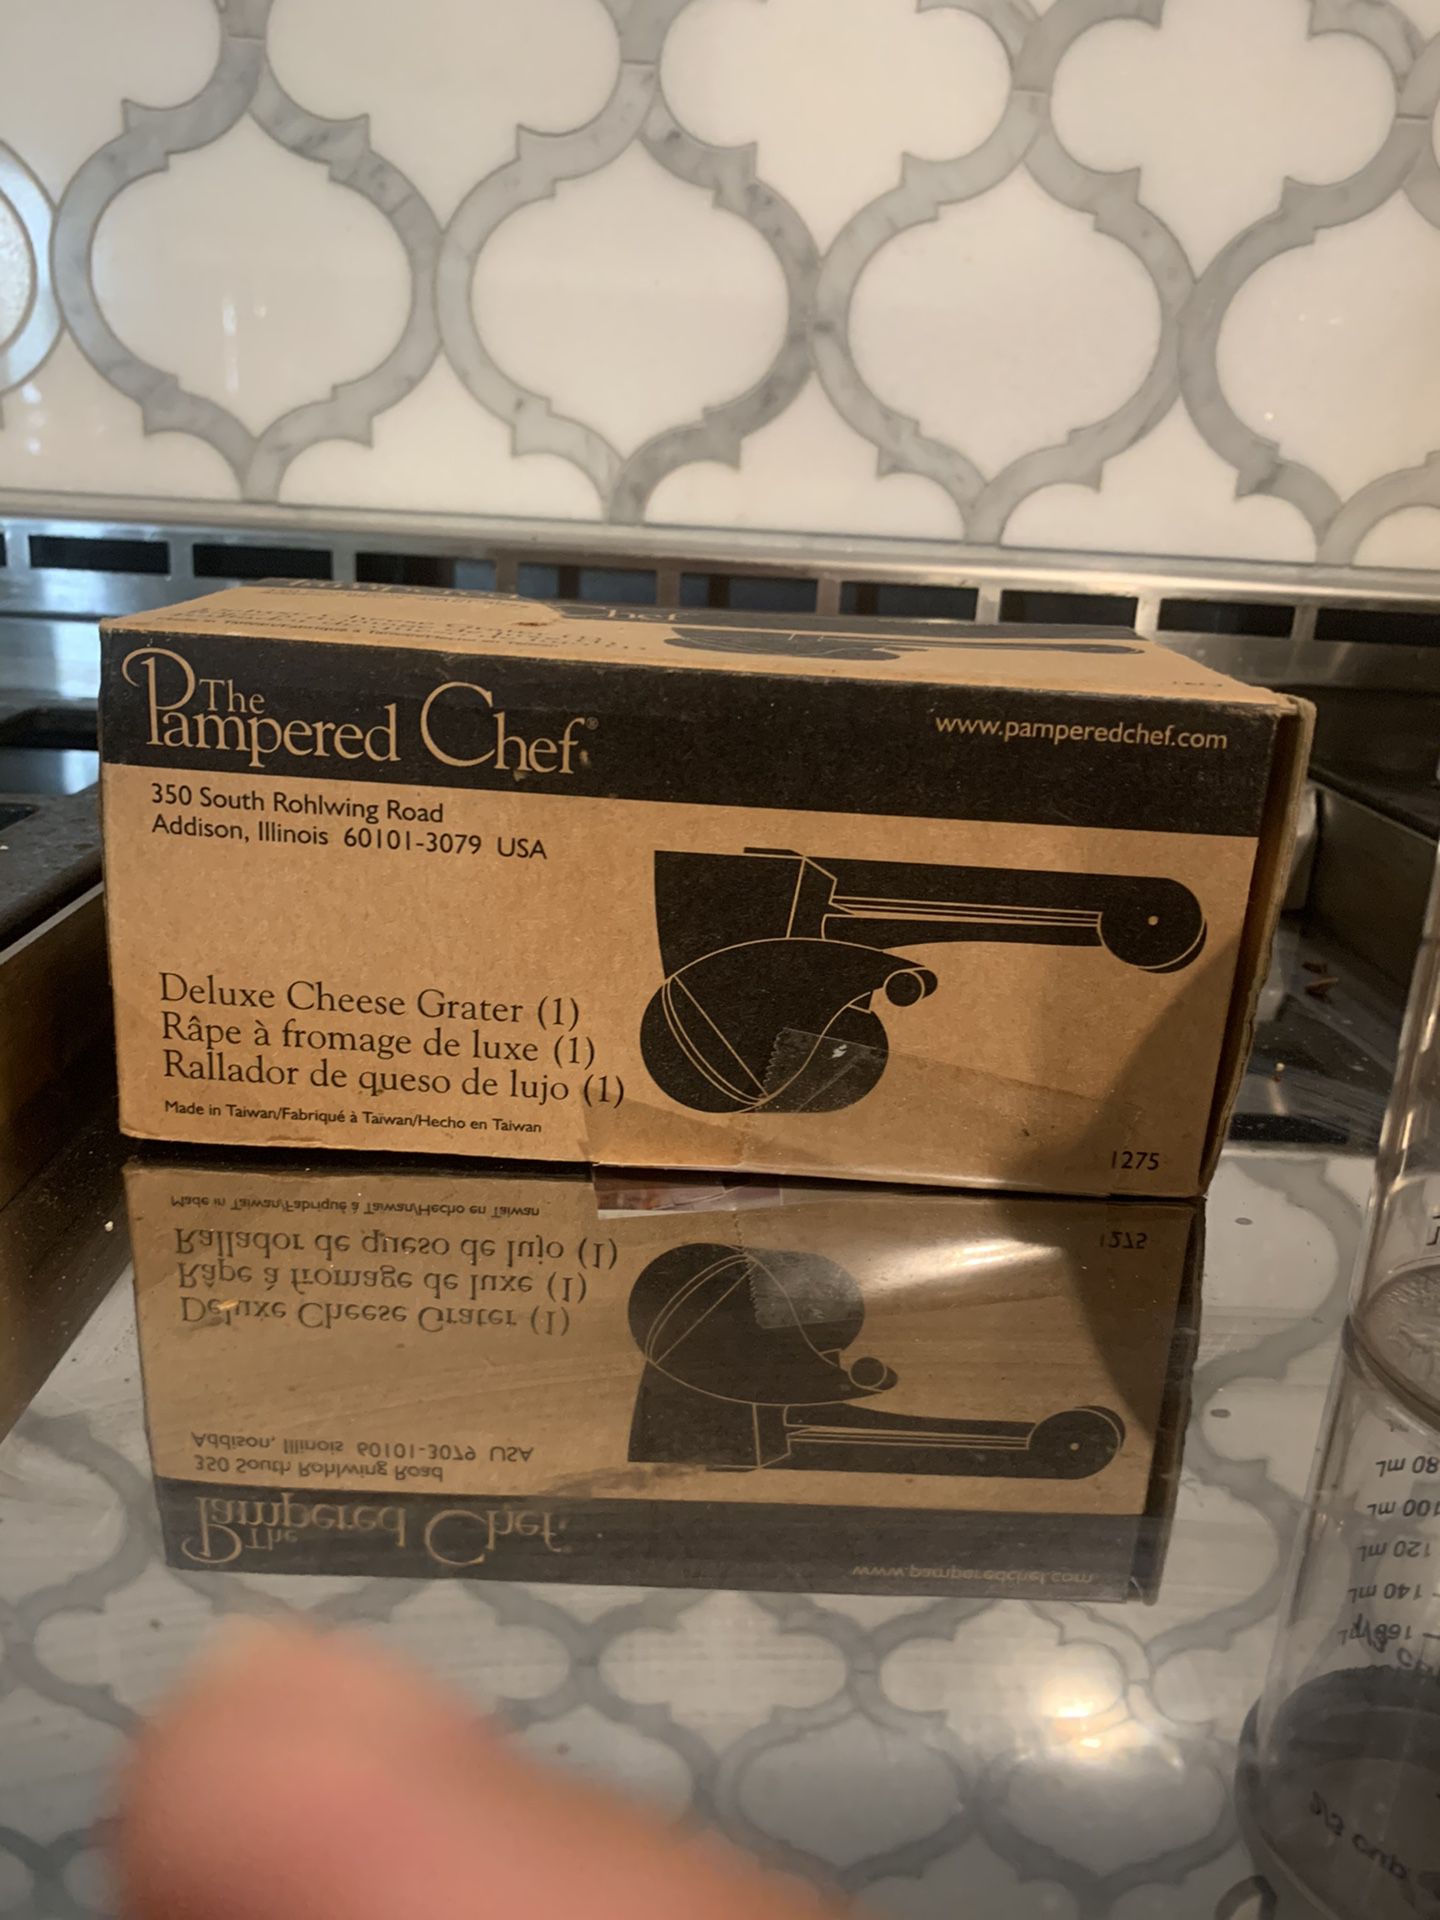 New PAMPERED CHEF Deluxe Cheese Grater & Grate Container